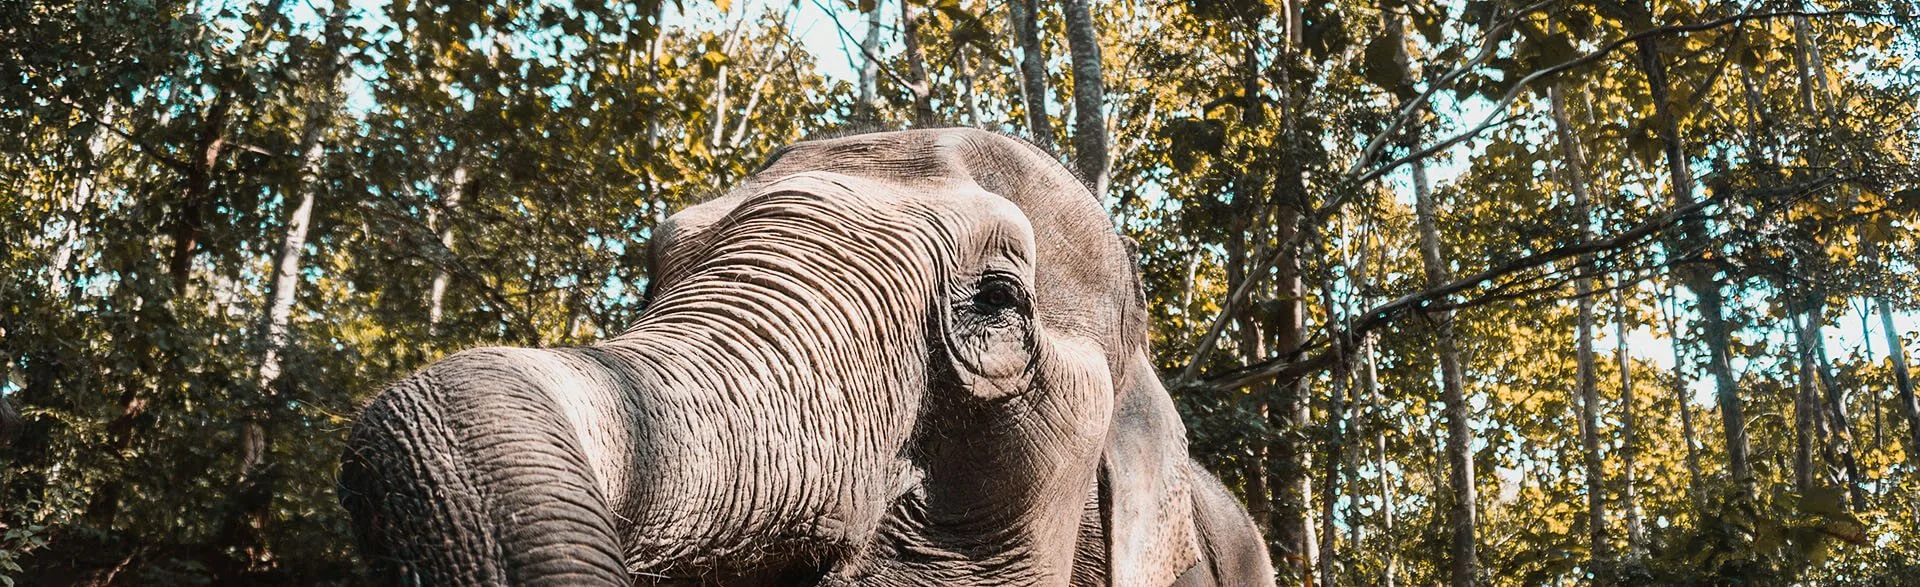 Elephant at Elephant Nature Park, the best elephant sanctuary in Chiang Mai.